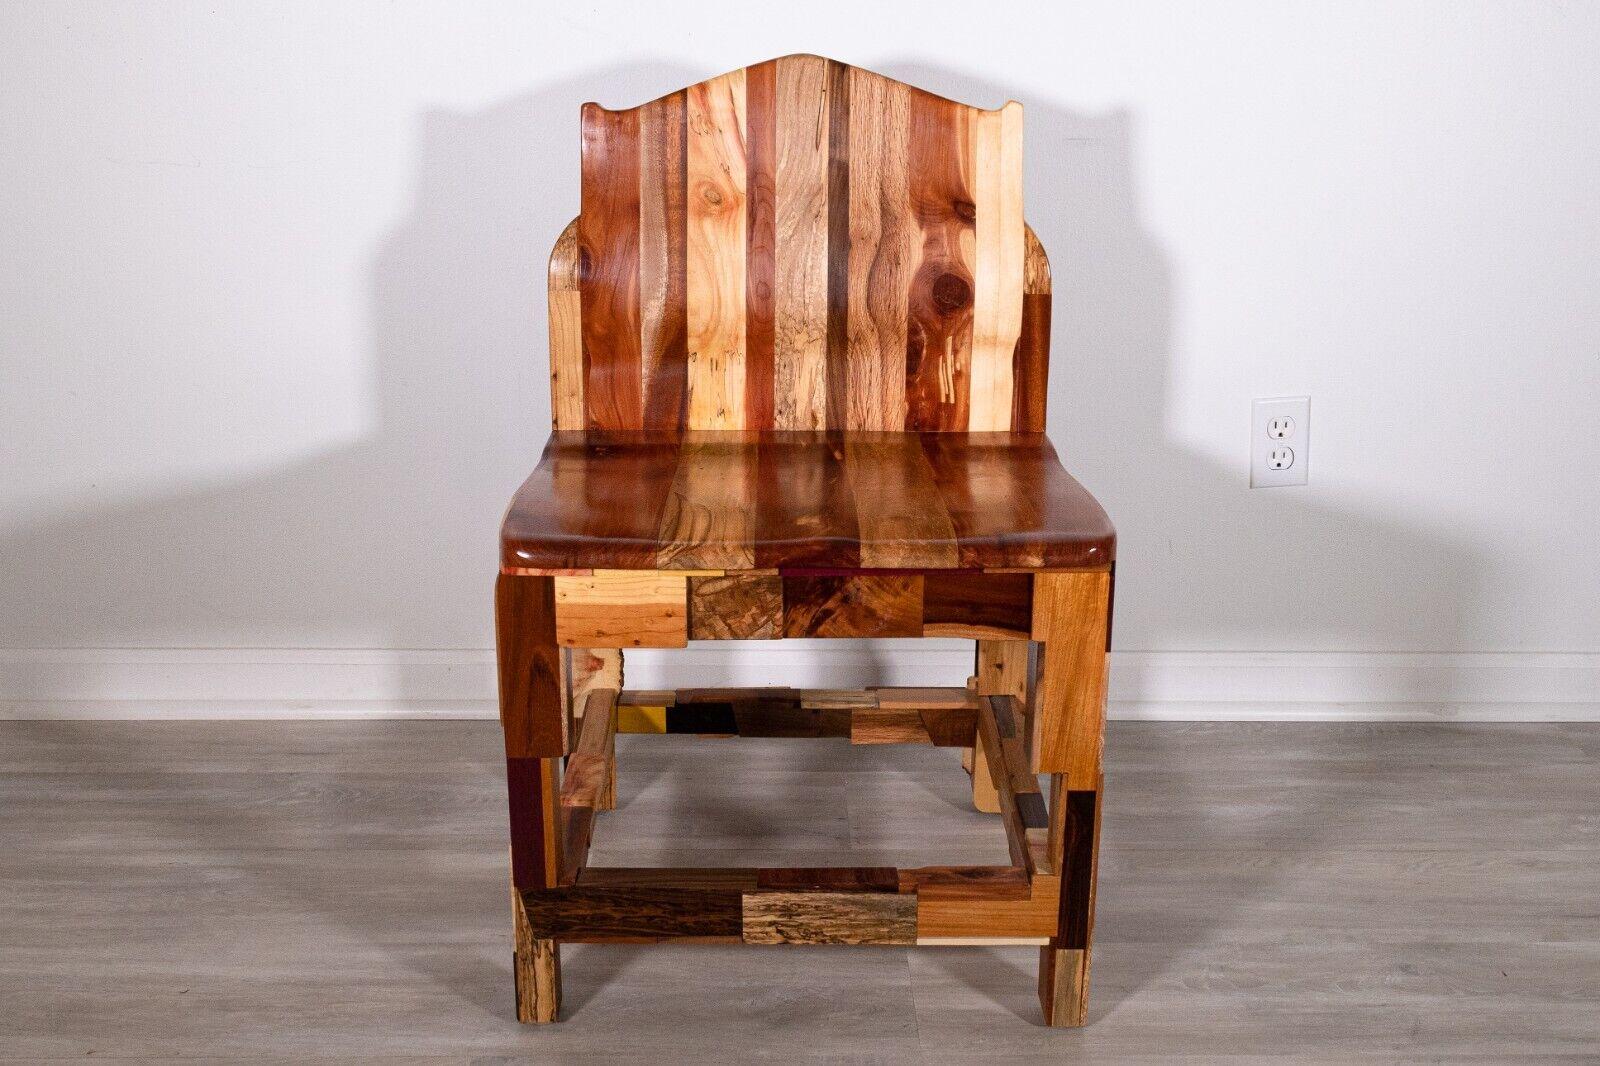 A truly unique handcrafted chair made with over 40 assortments of wood that is extremely well constructed and sturdy. The myriad of wood and grains creates layers of dimensions and design. Handcrafted by Michigan artesian Larry Buettner. Underside